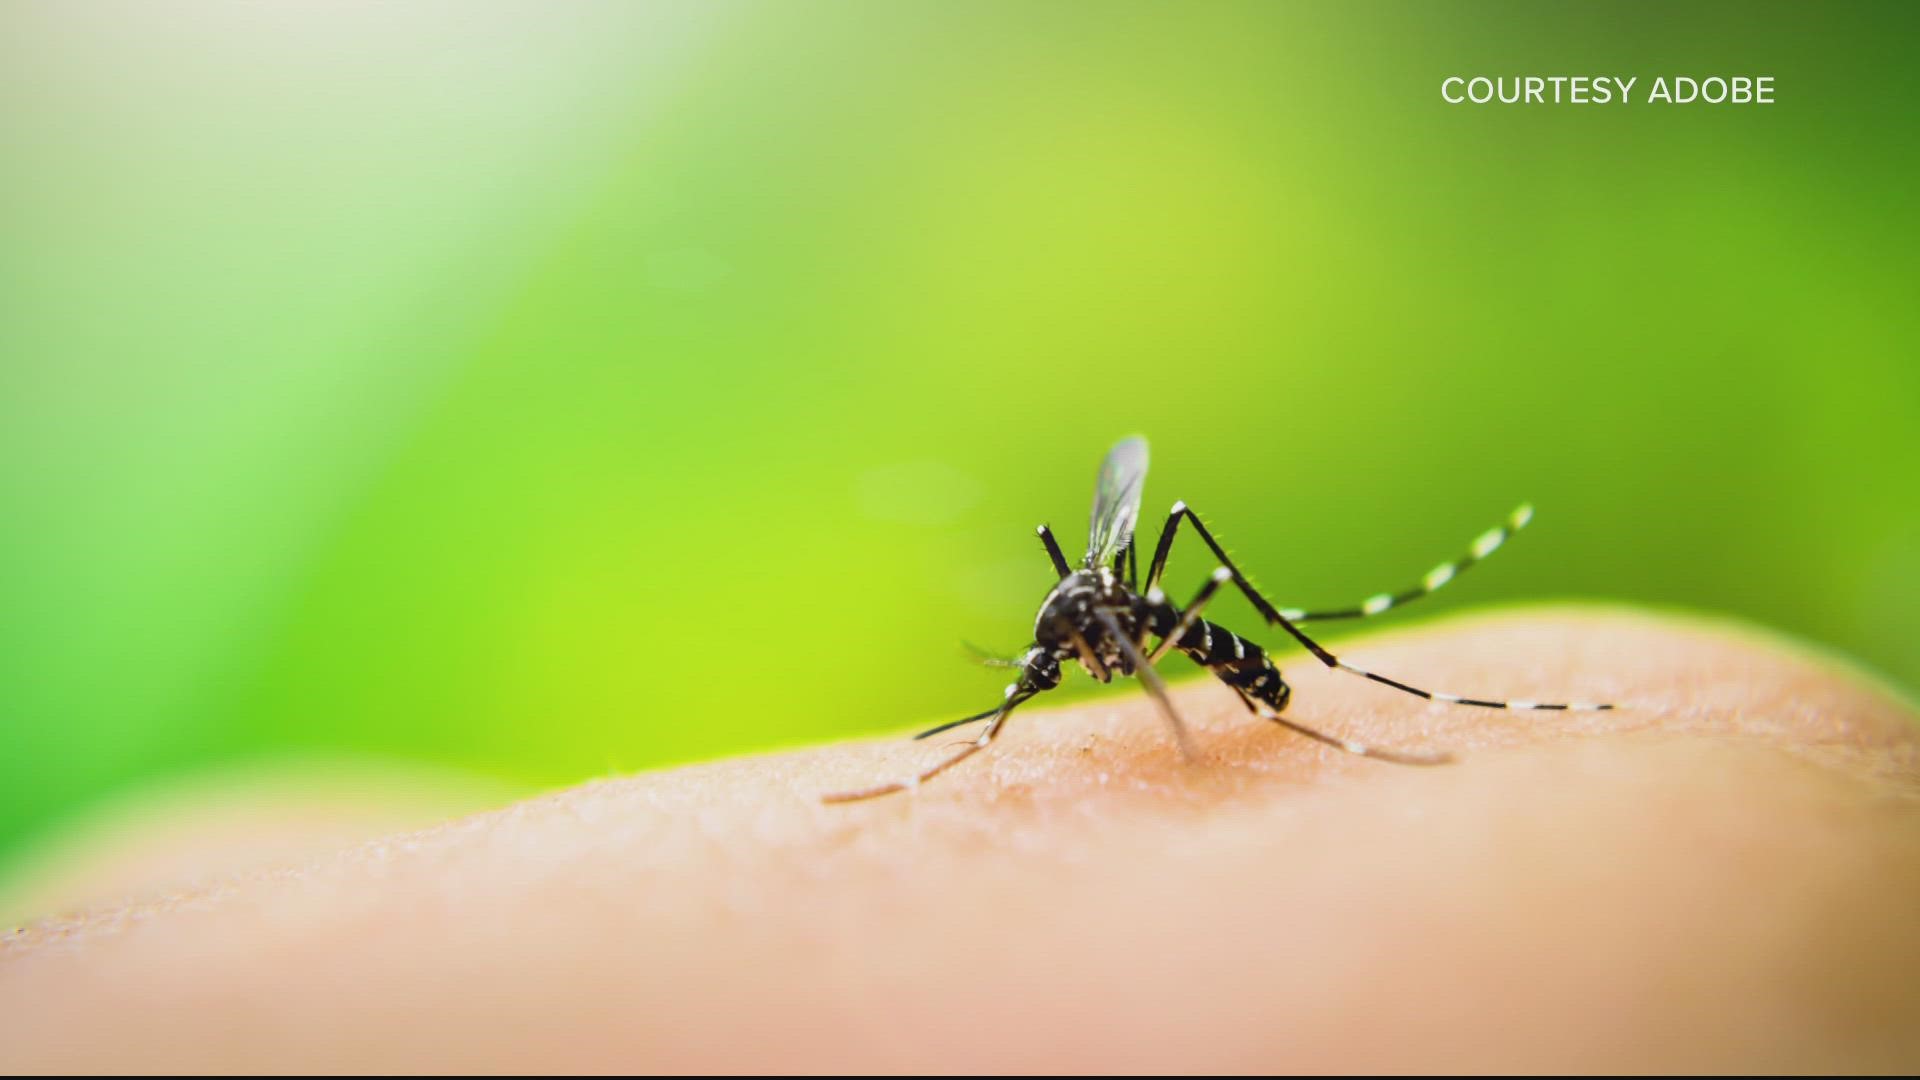 Mosquitoes do not die in winter, they go into hibernation. So no, cold weather does not kill all mosquitoes.